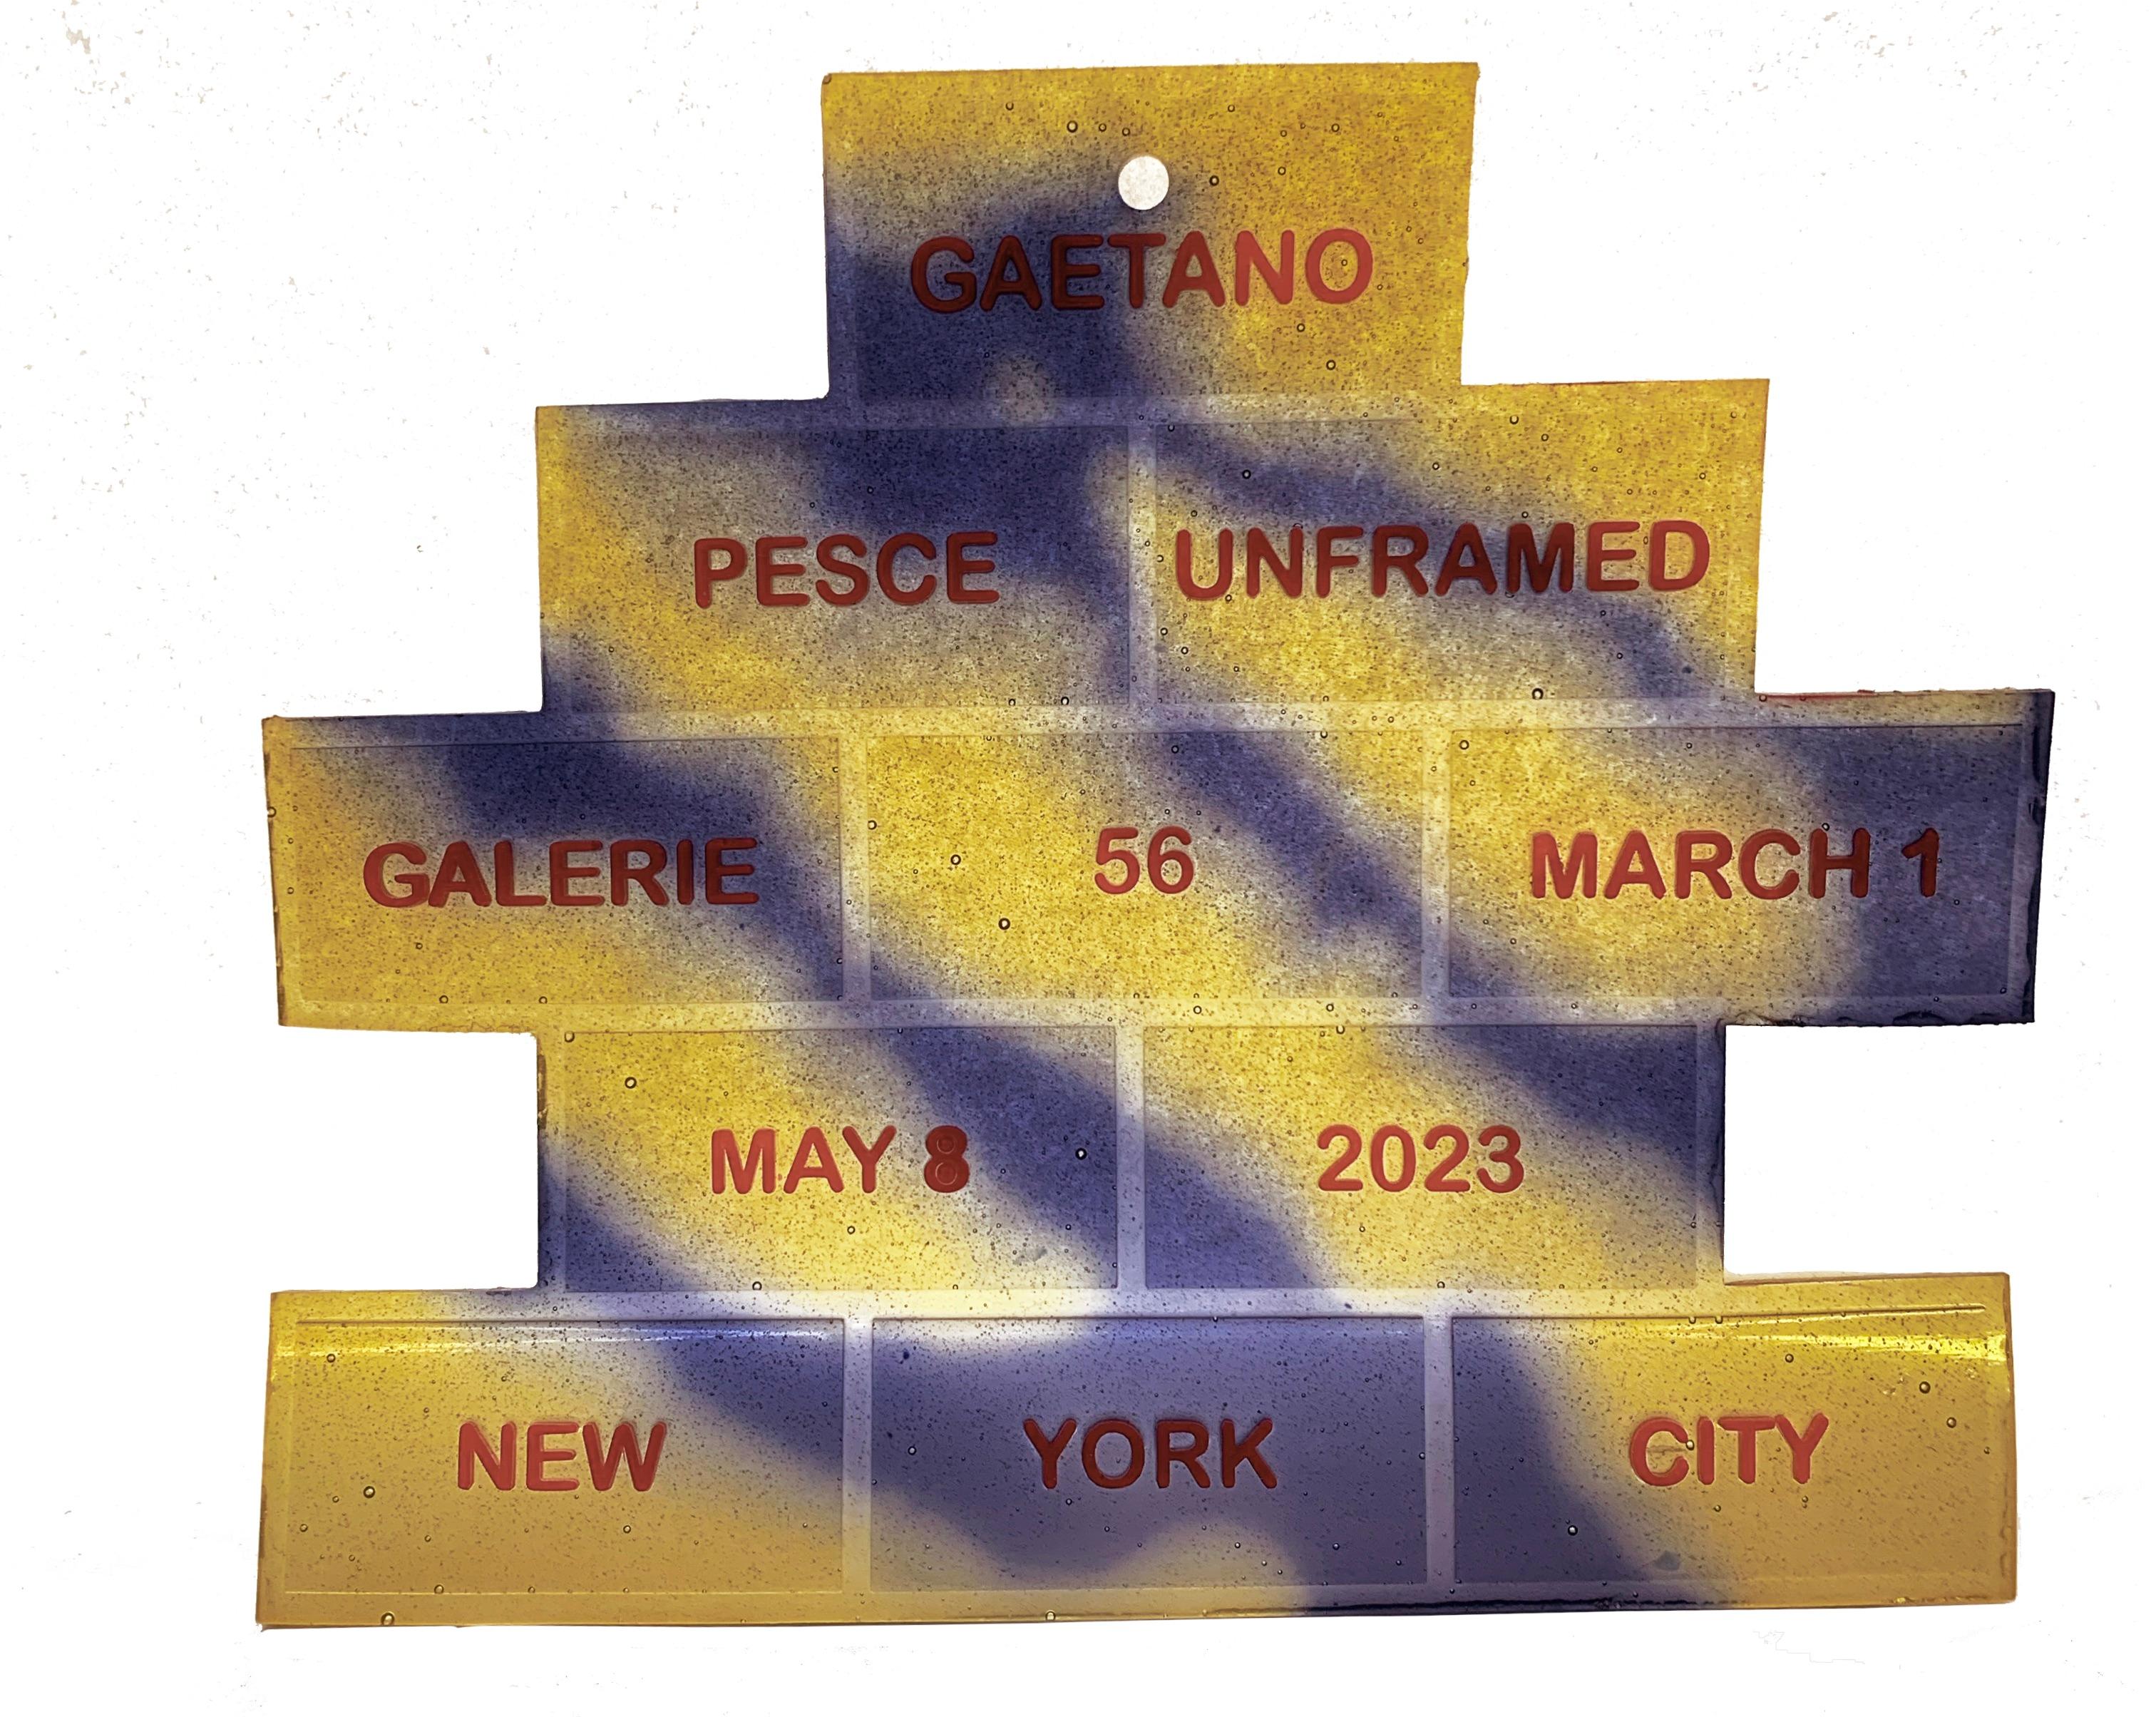  3 Gaetano Pesce Resin Invitations from 3 Hot Spots: NY, LA & Knokke Zoute In Good Condition For Sale In Hamden, CT